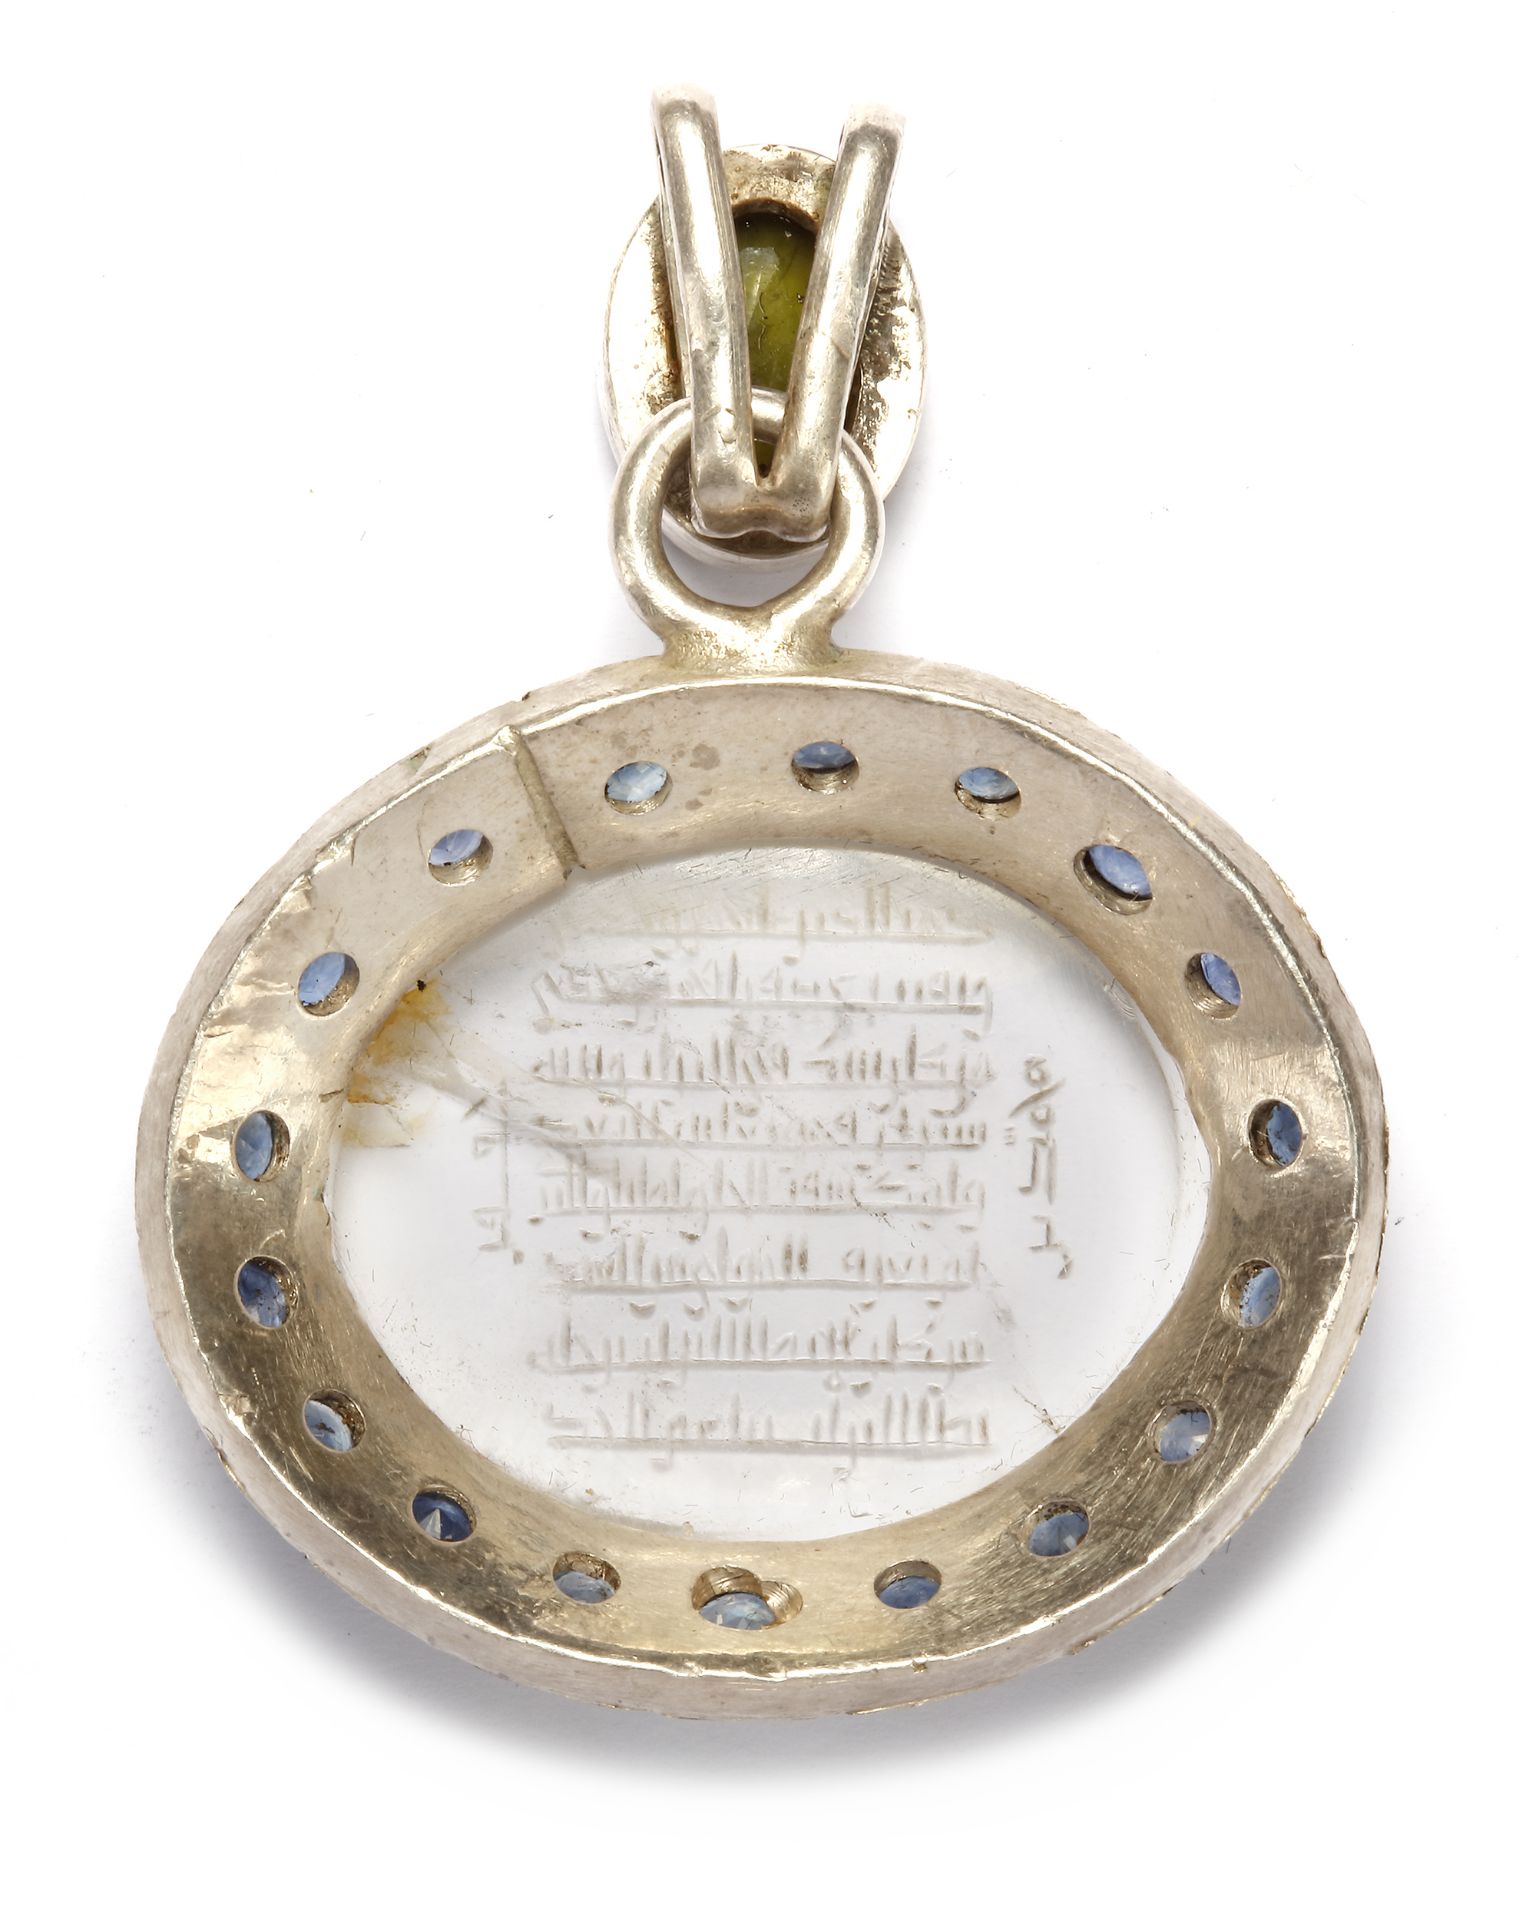 A CRYSTAL SILVER MOUNTED AND GEMSTONES- SET CARVED PENDANT, 4TH AH -11TH AD CENTURY - Image 3 of 7